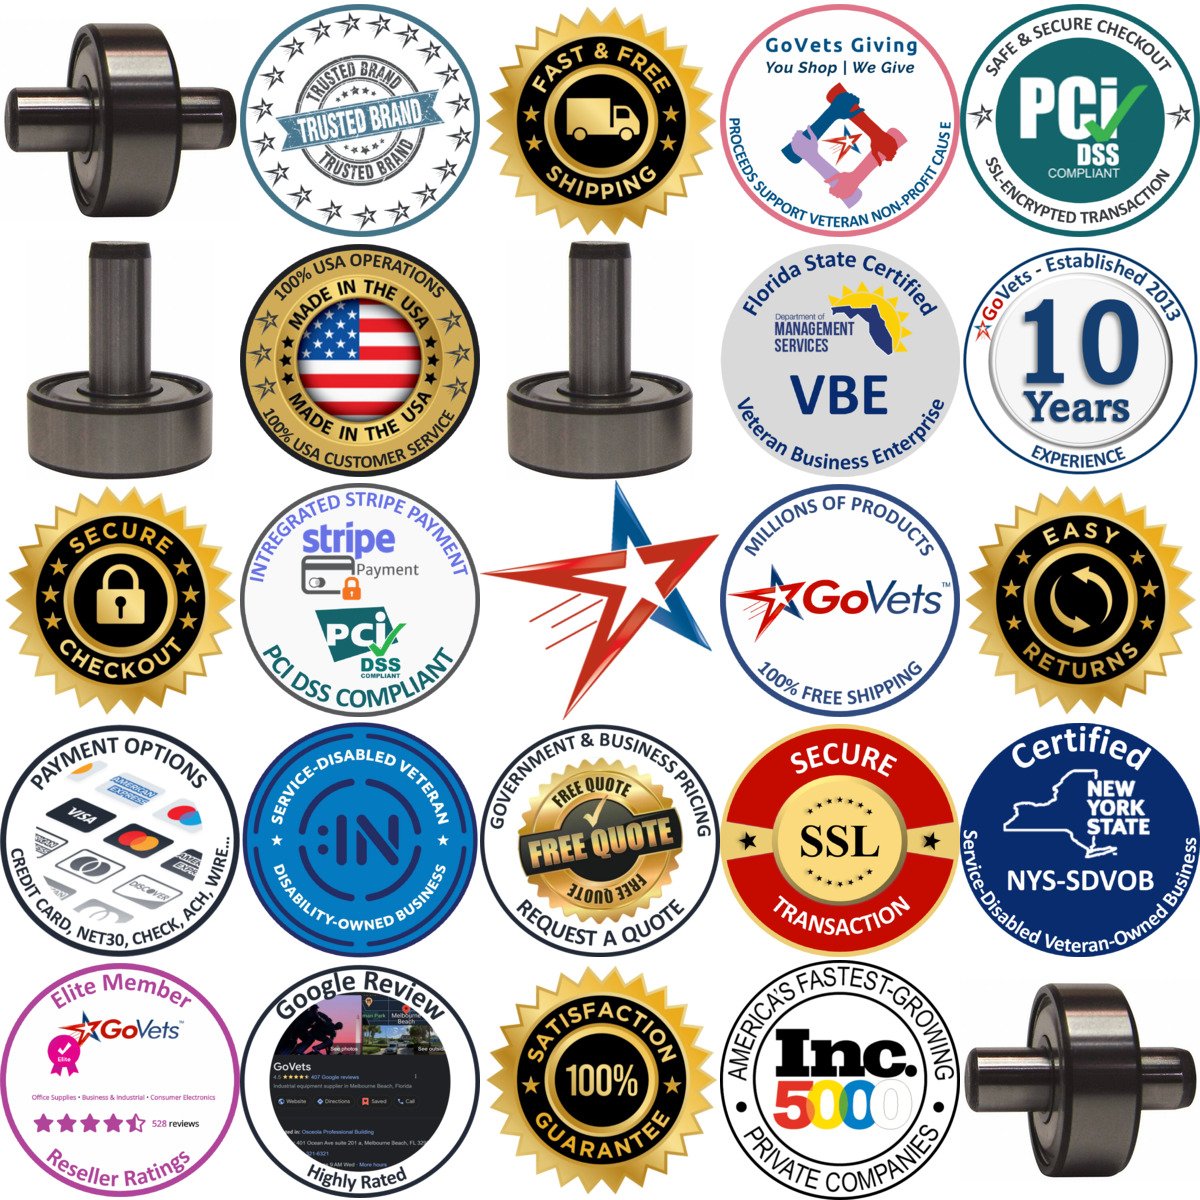 A selection of Pin Bearings products on GoVets